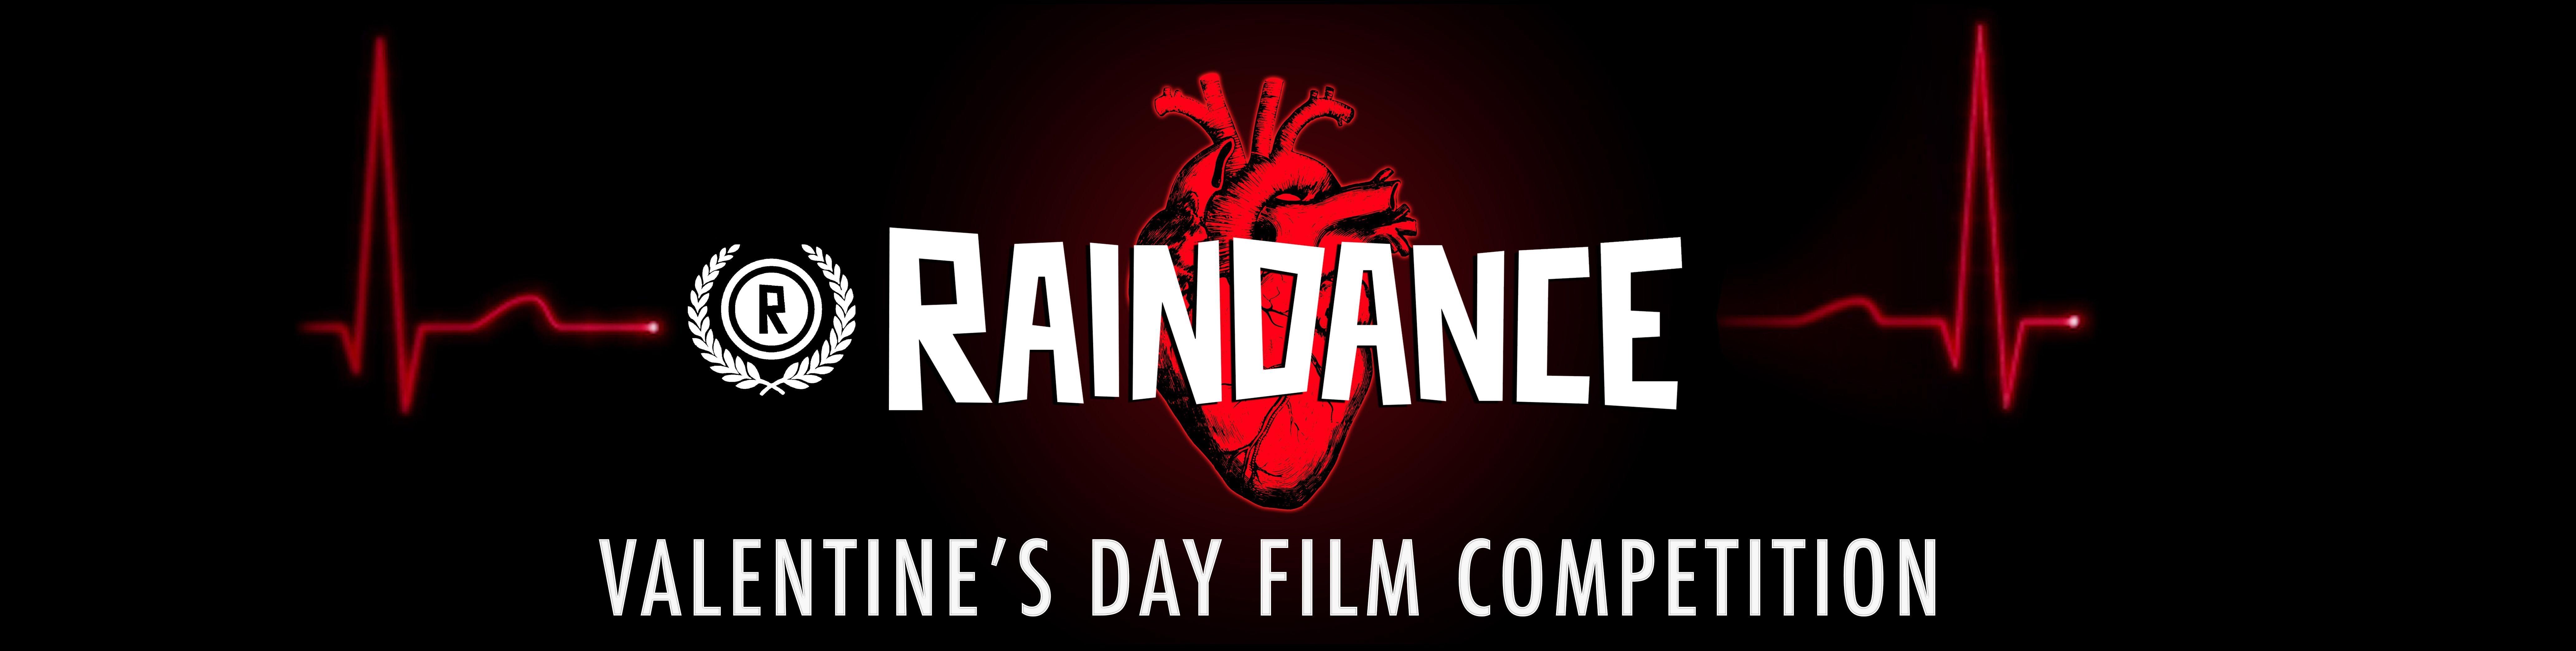 Foreign Movie Logo - Raindance - Homepage | The Home of Independent Film